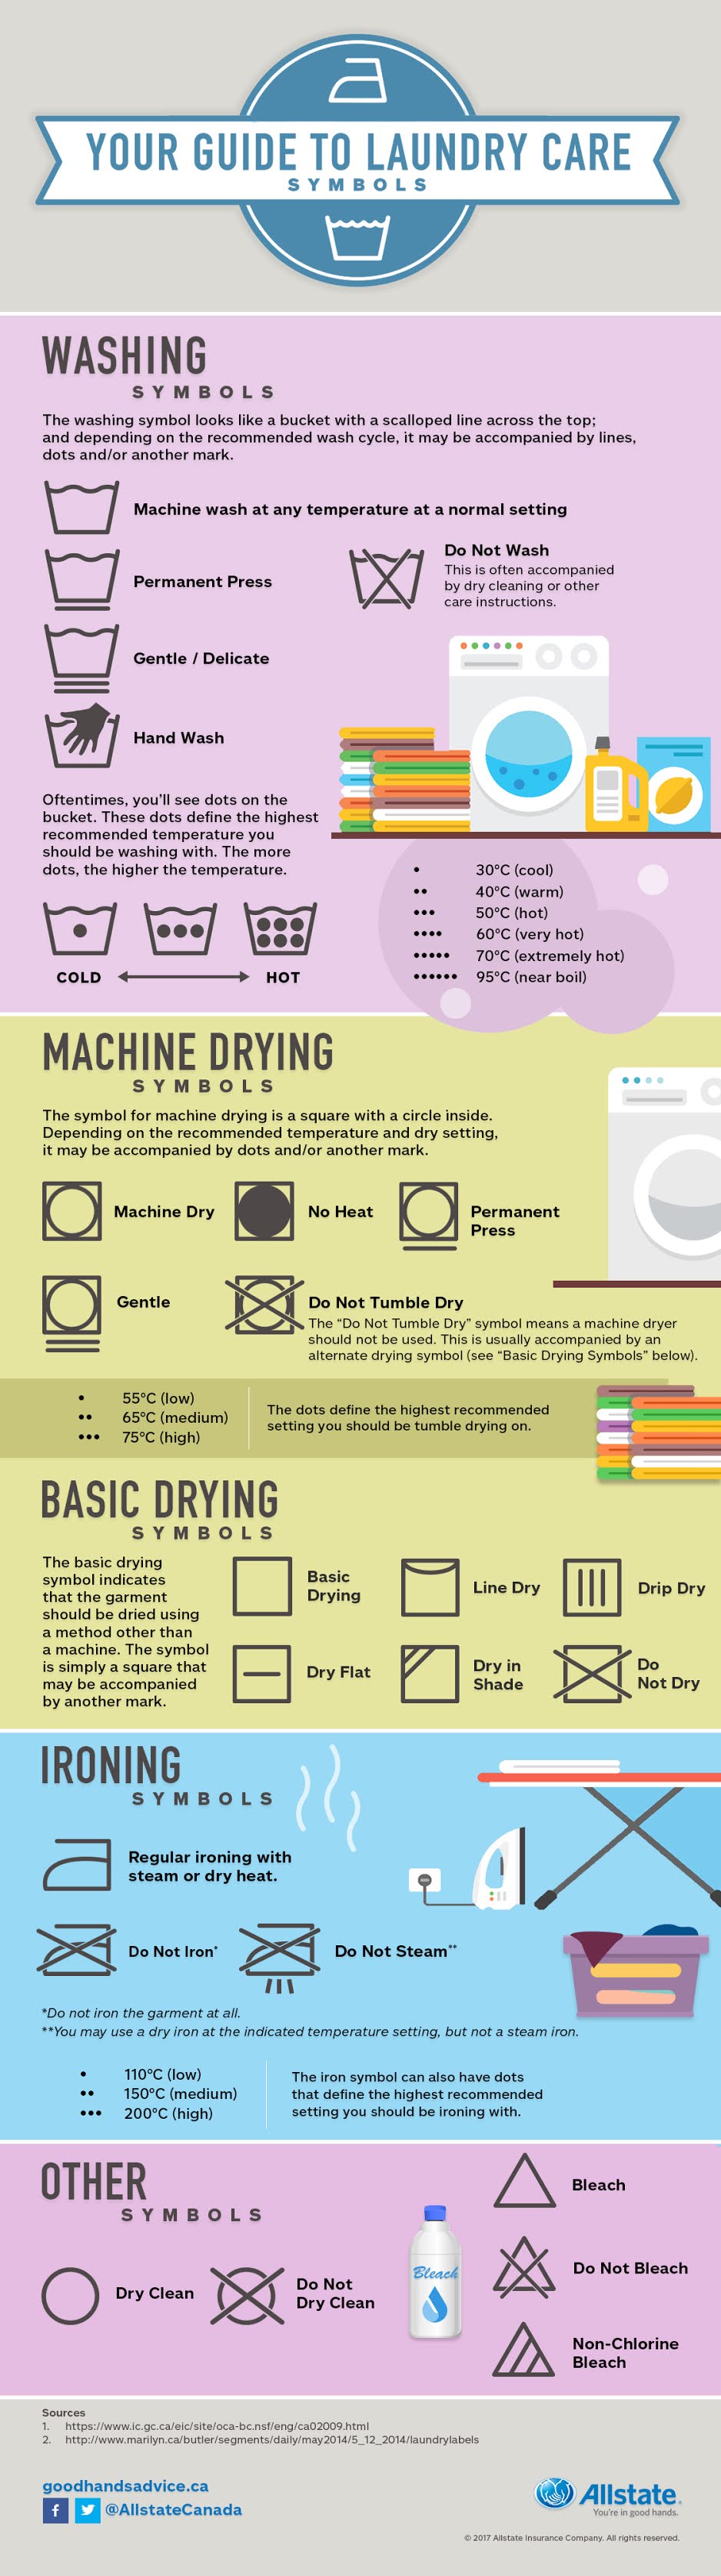 Your Guide to Laundry Care Symbols #infographic